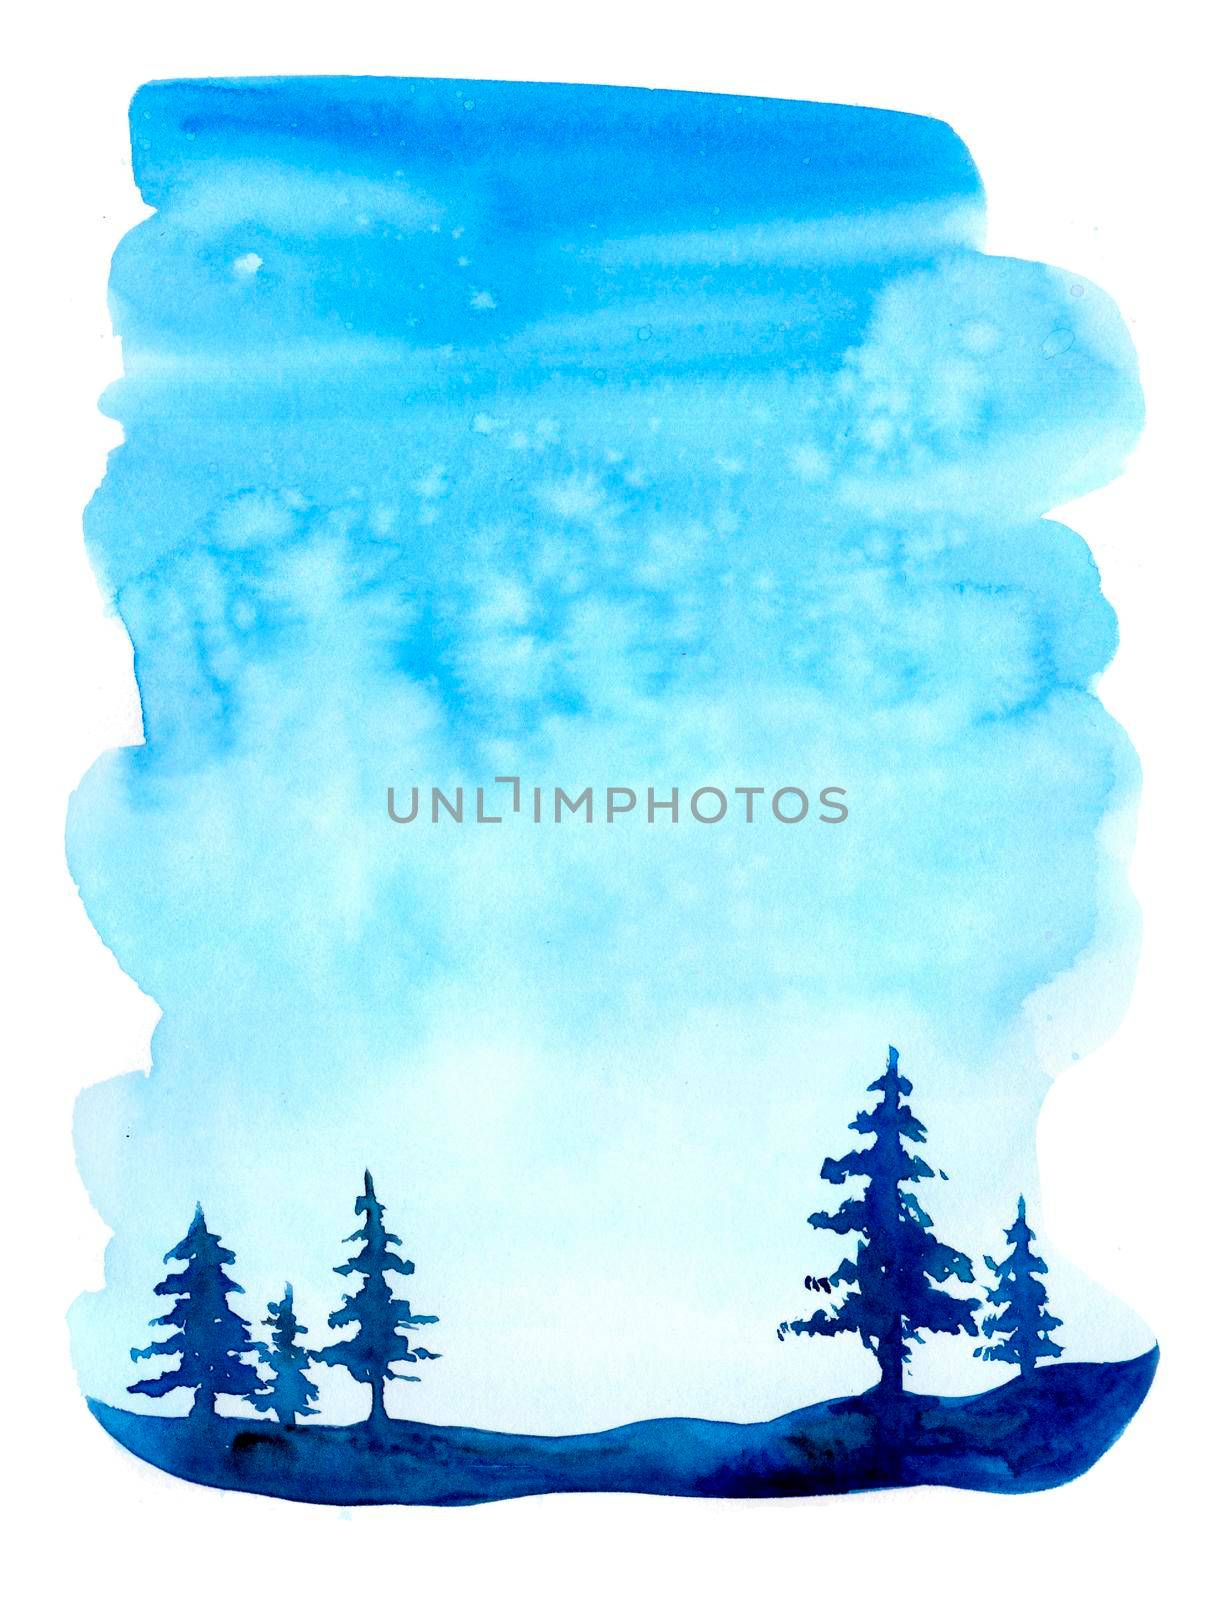 Watercolor christmas winter landscape with snow and trees. Treescape with pine and fir. Illustration landscape for print, texture, wallpaper, greeting card. Blue color. Beautiful nature watercolour by DesignAB